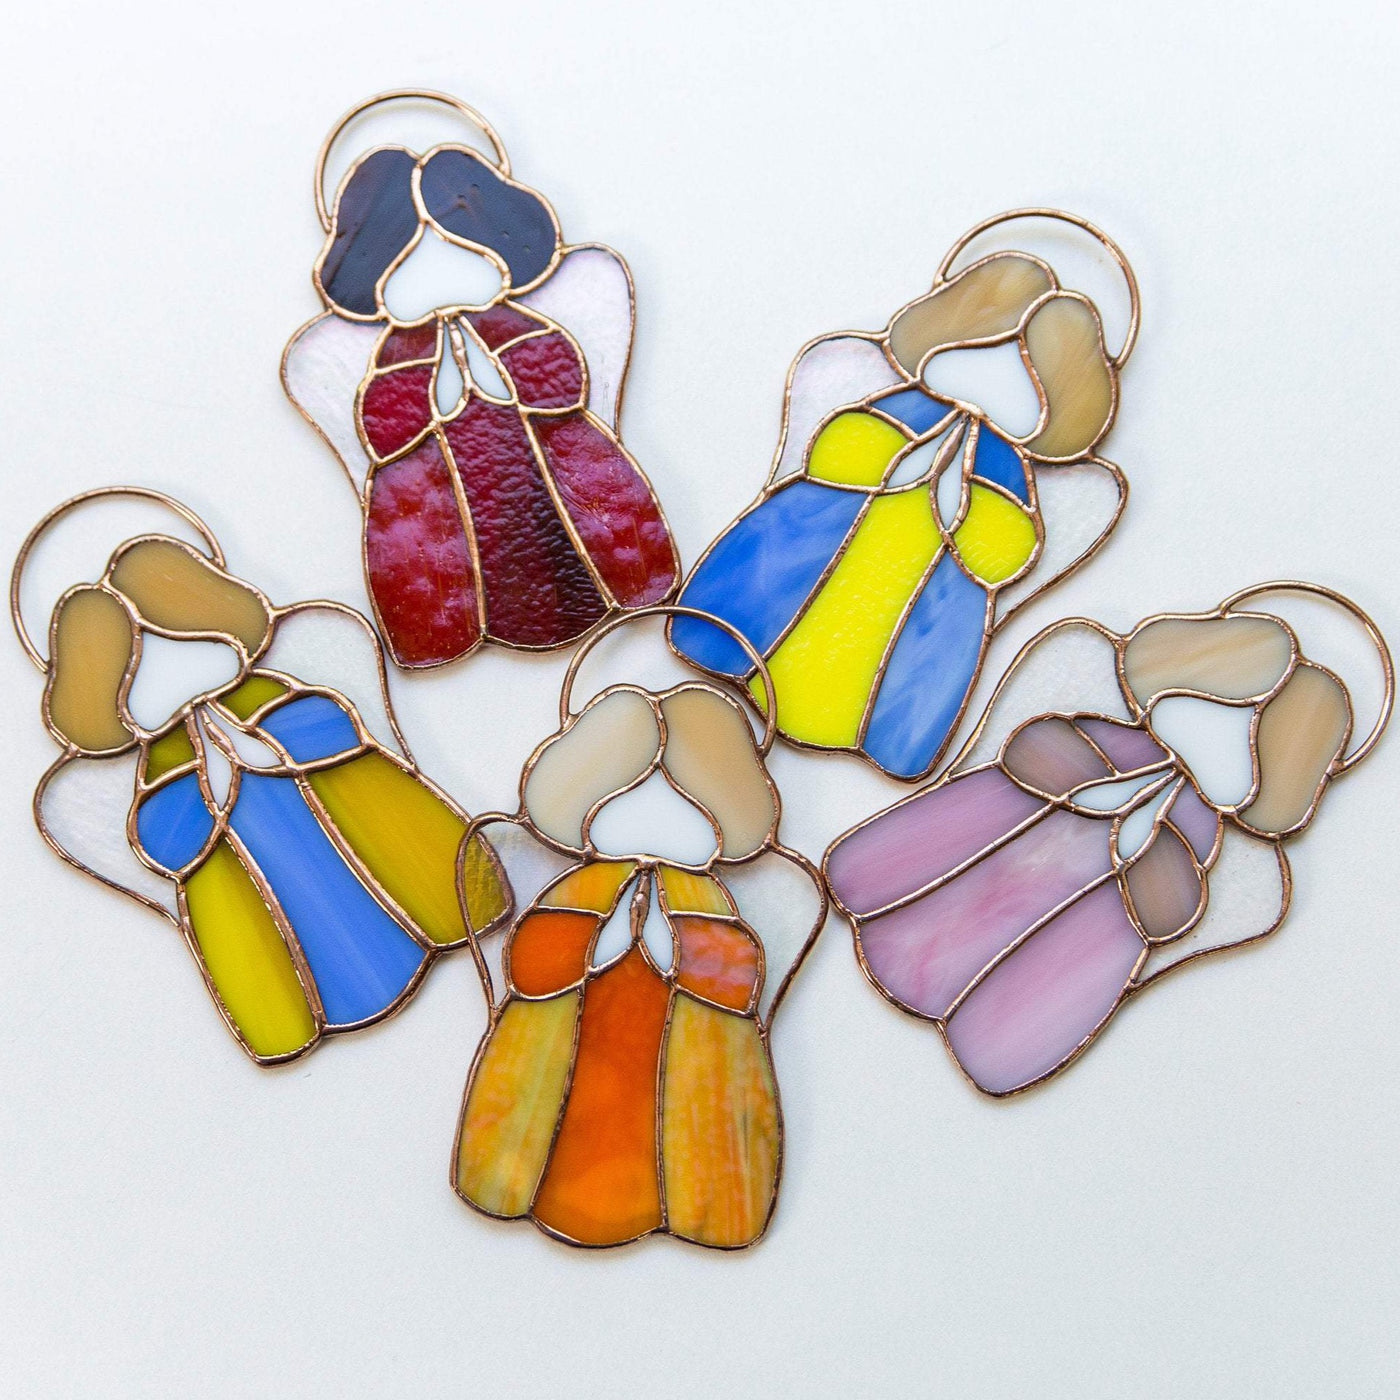 Five stained glass colourful angels suncatchers